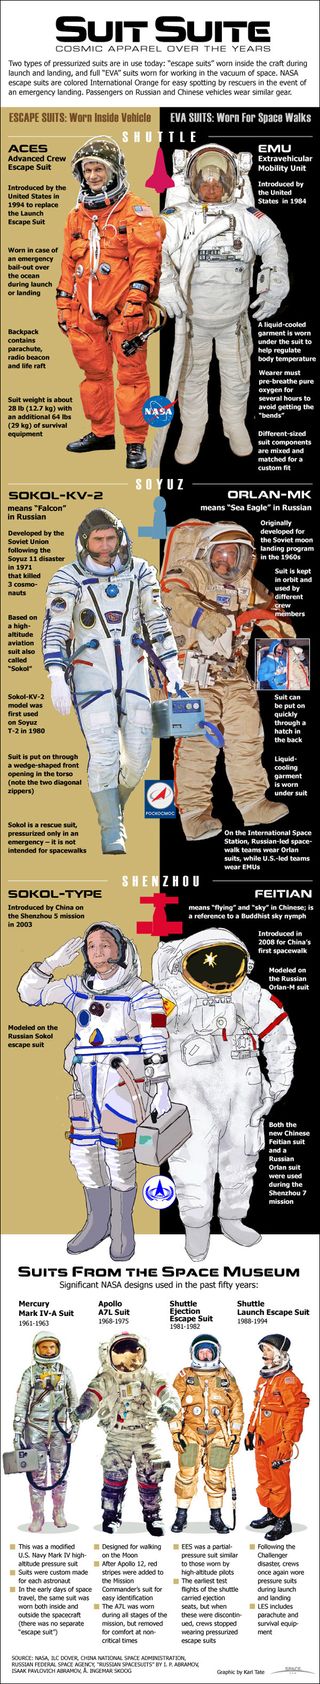 NASA's spacesuits have come a long way since the dawn of human spaceflight. See how U.S. spacesuit tech has evolved in this Space.com infographic.